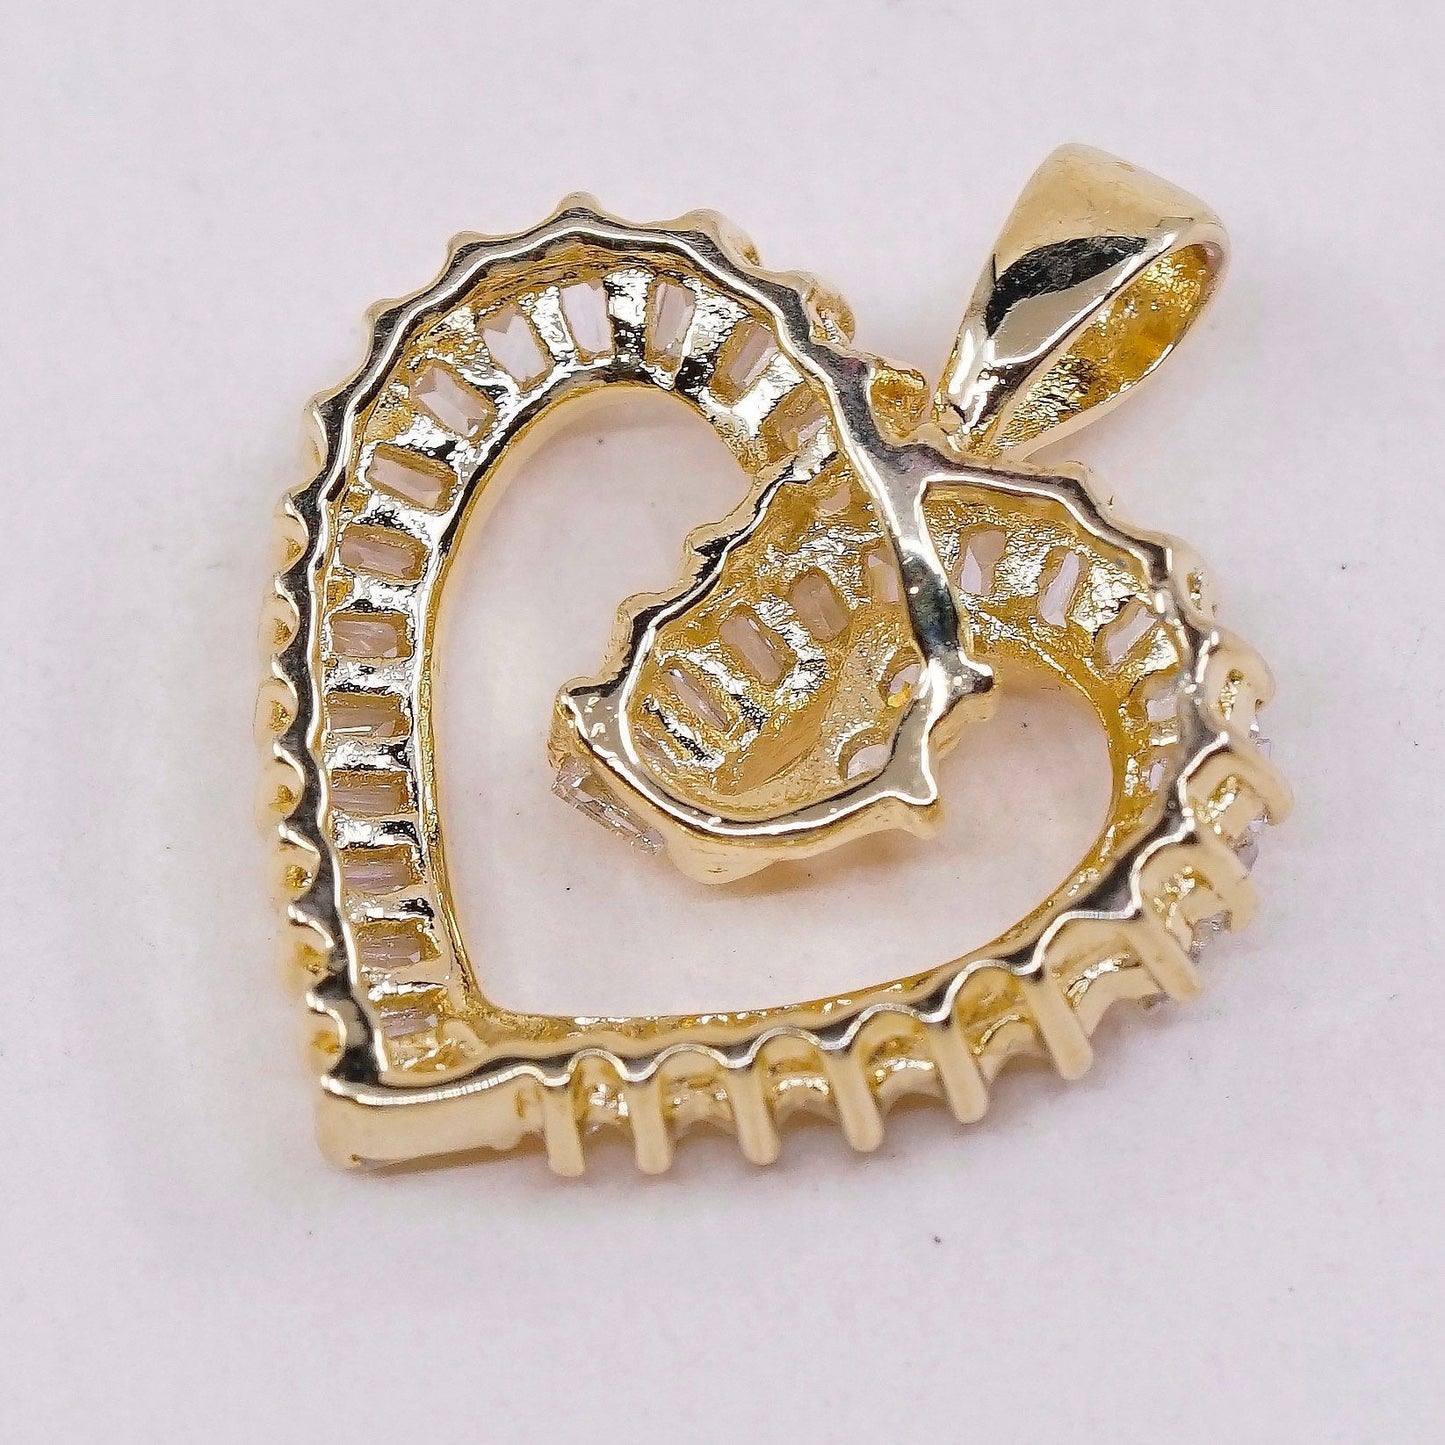 VTG vermeil Gold over Sterling silver pendant, 925 heart pendant with cz